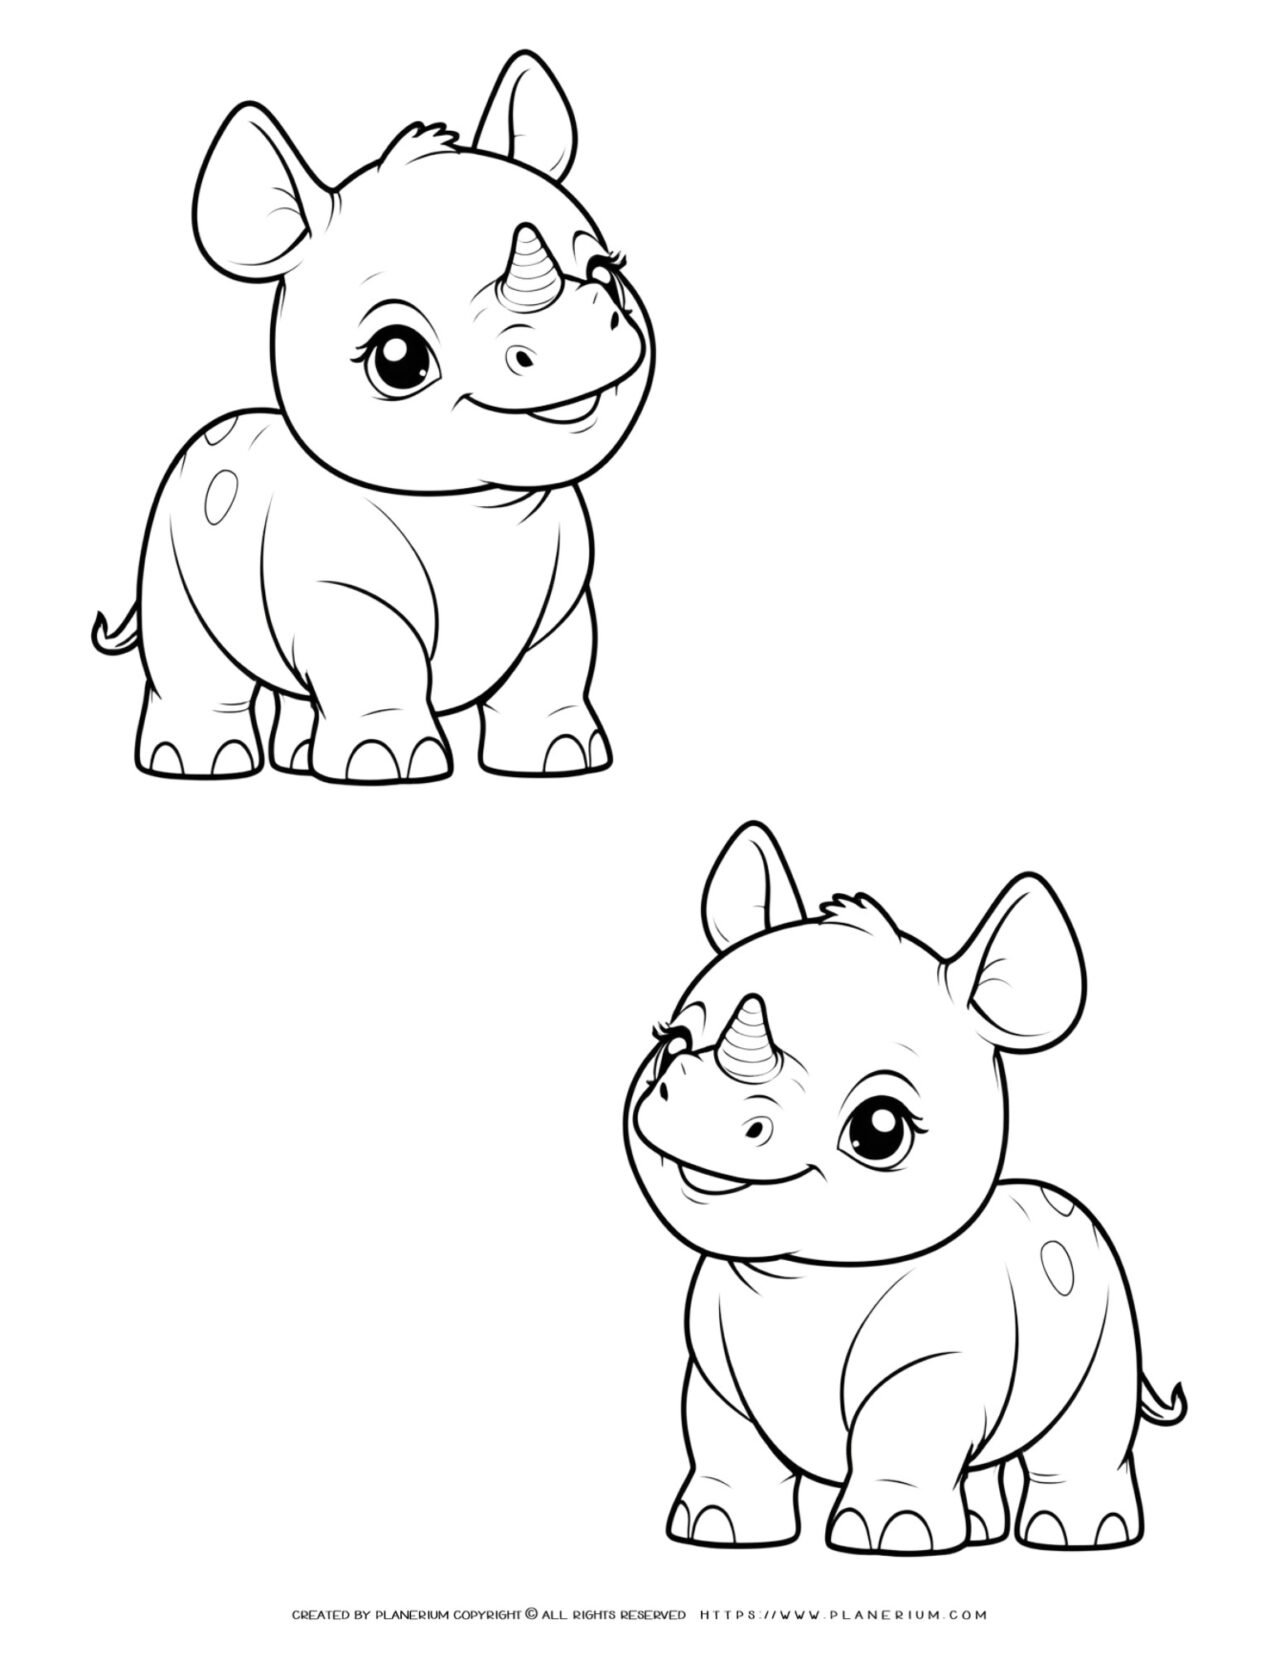 two-cute-baby-rhinoceros-outline-animal-coloring-page-for-kids